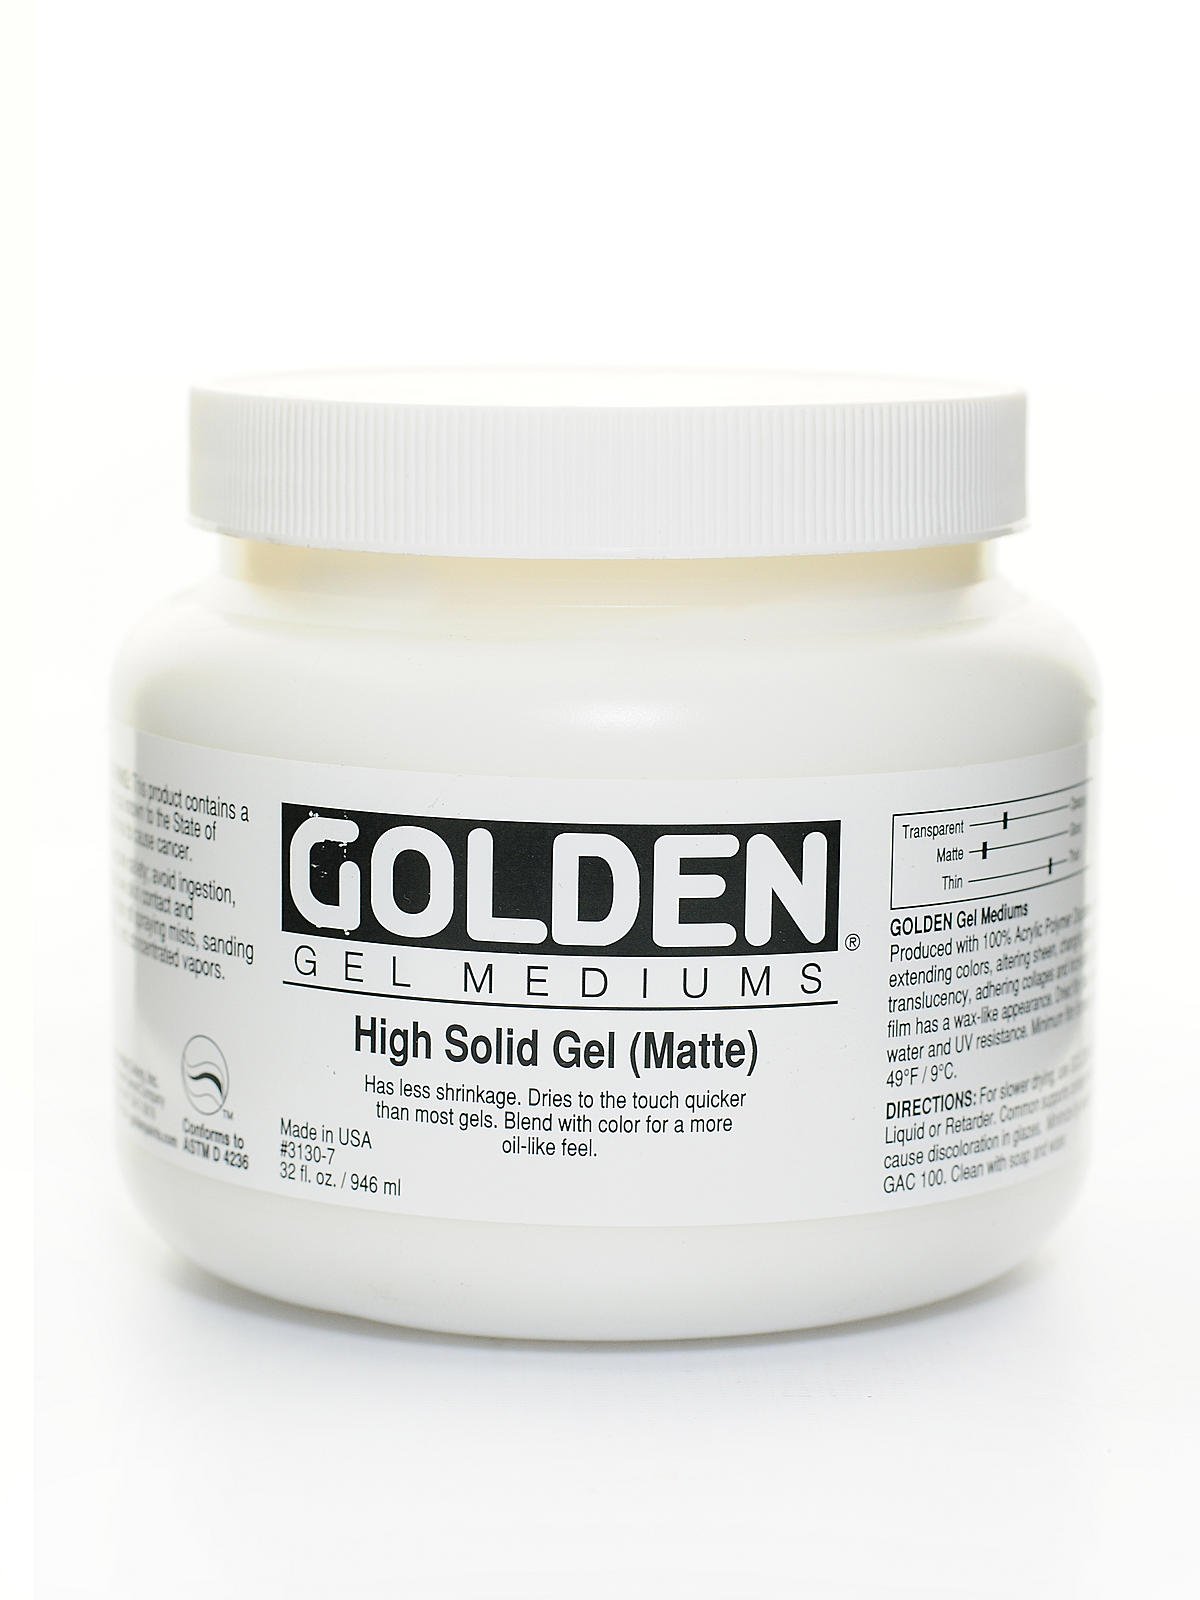 GOLDEN Gel Medium and Fluid Acrylics Featured in Spring Promotion